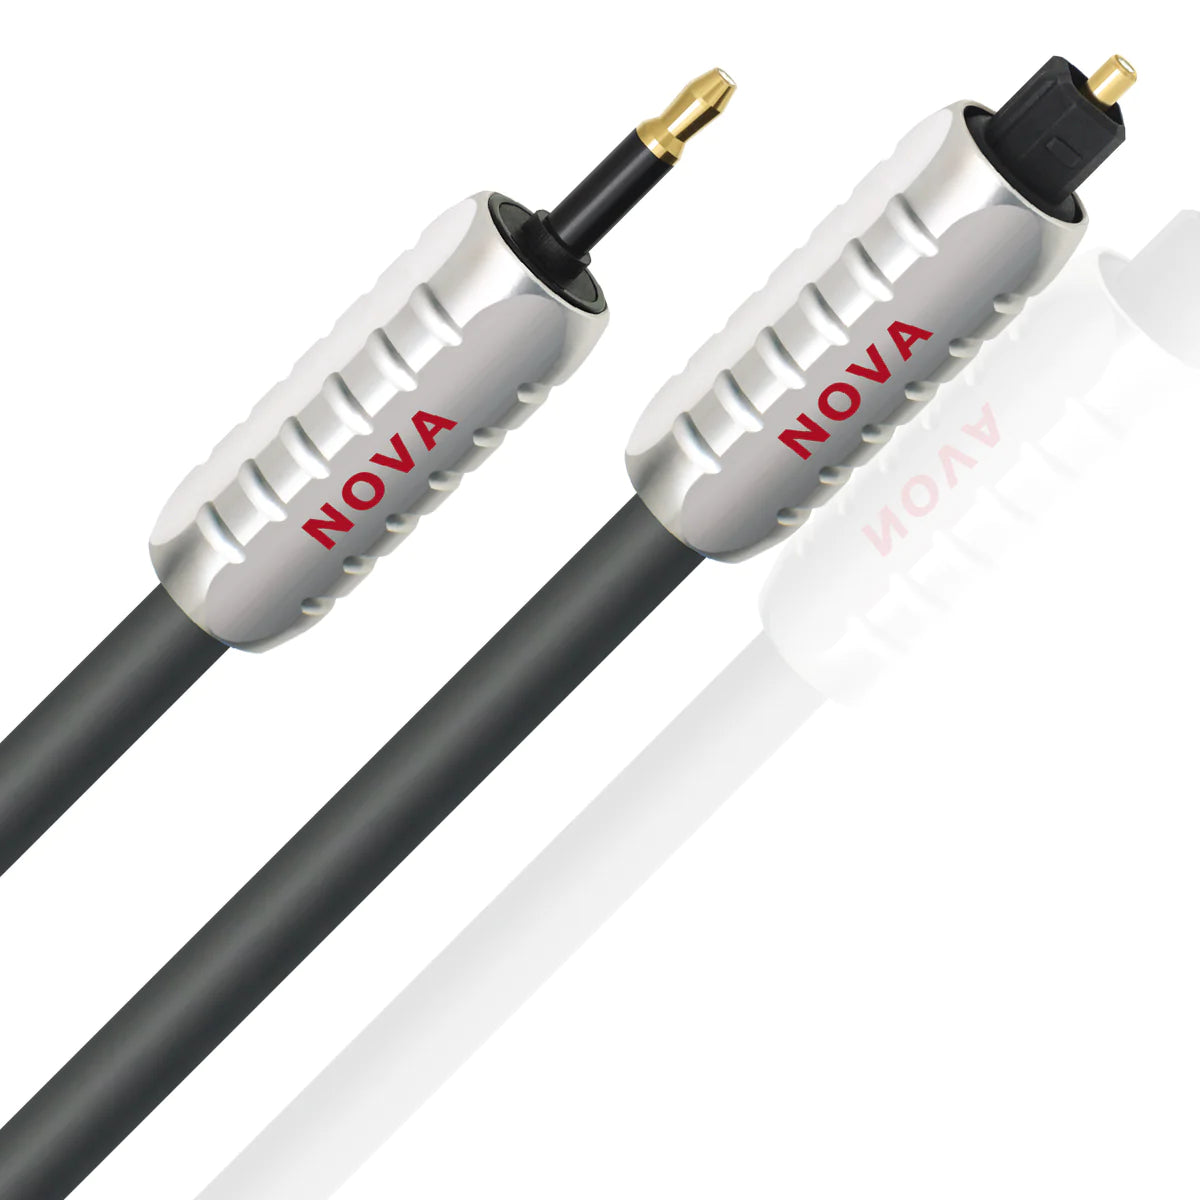 WireWorld Nova Toslink Optical Audio Cables - Toslink to 3.5mm